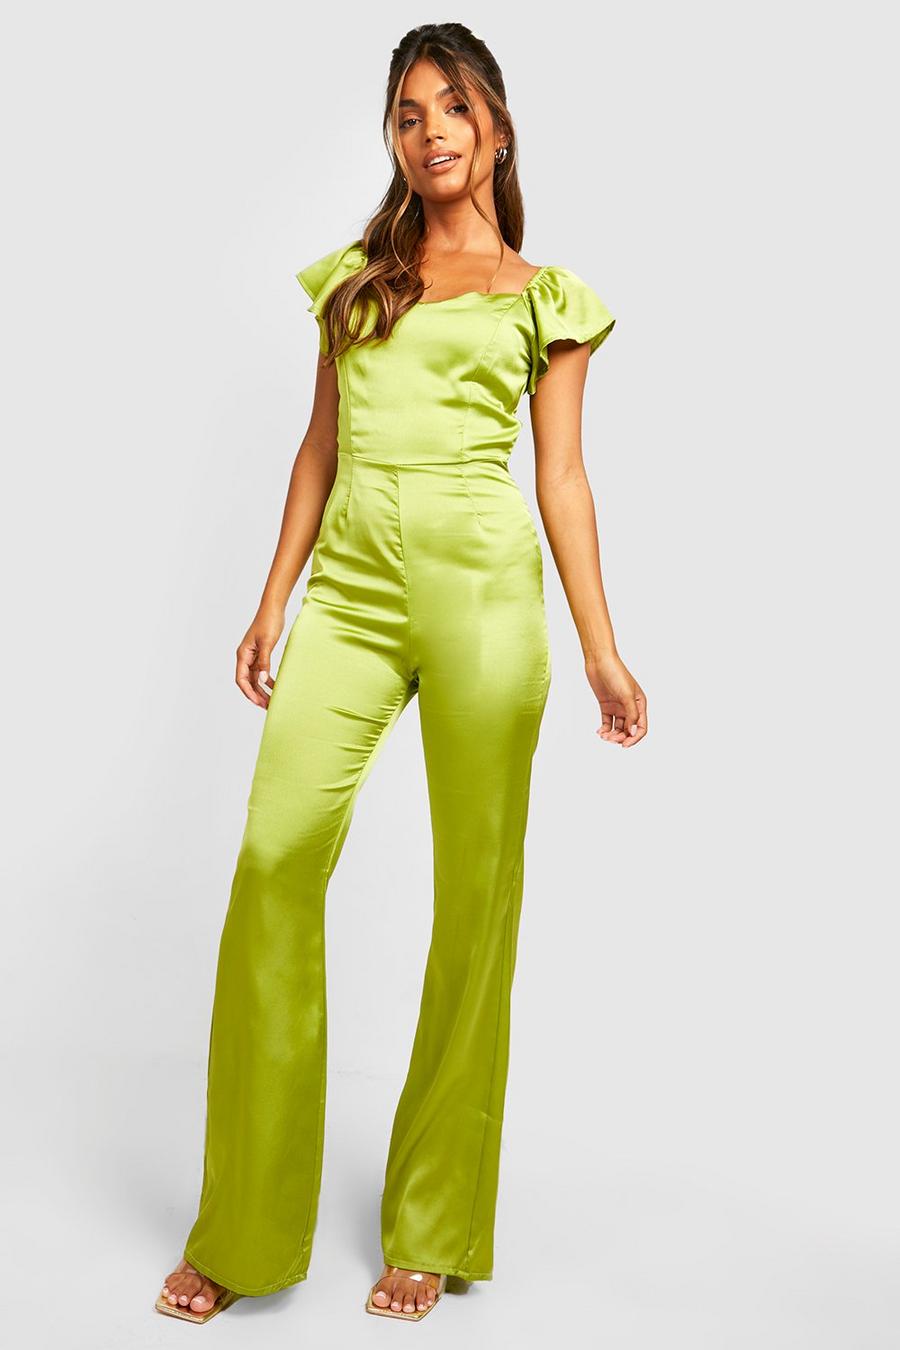 Chartreuse yellow Frill Sleeve Satin Jumpsuit